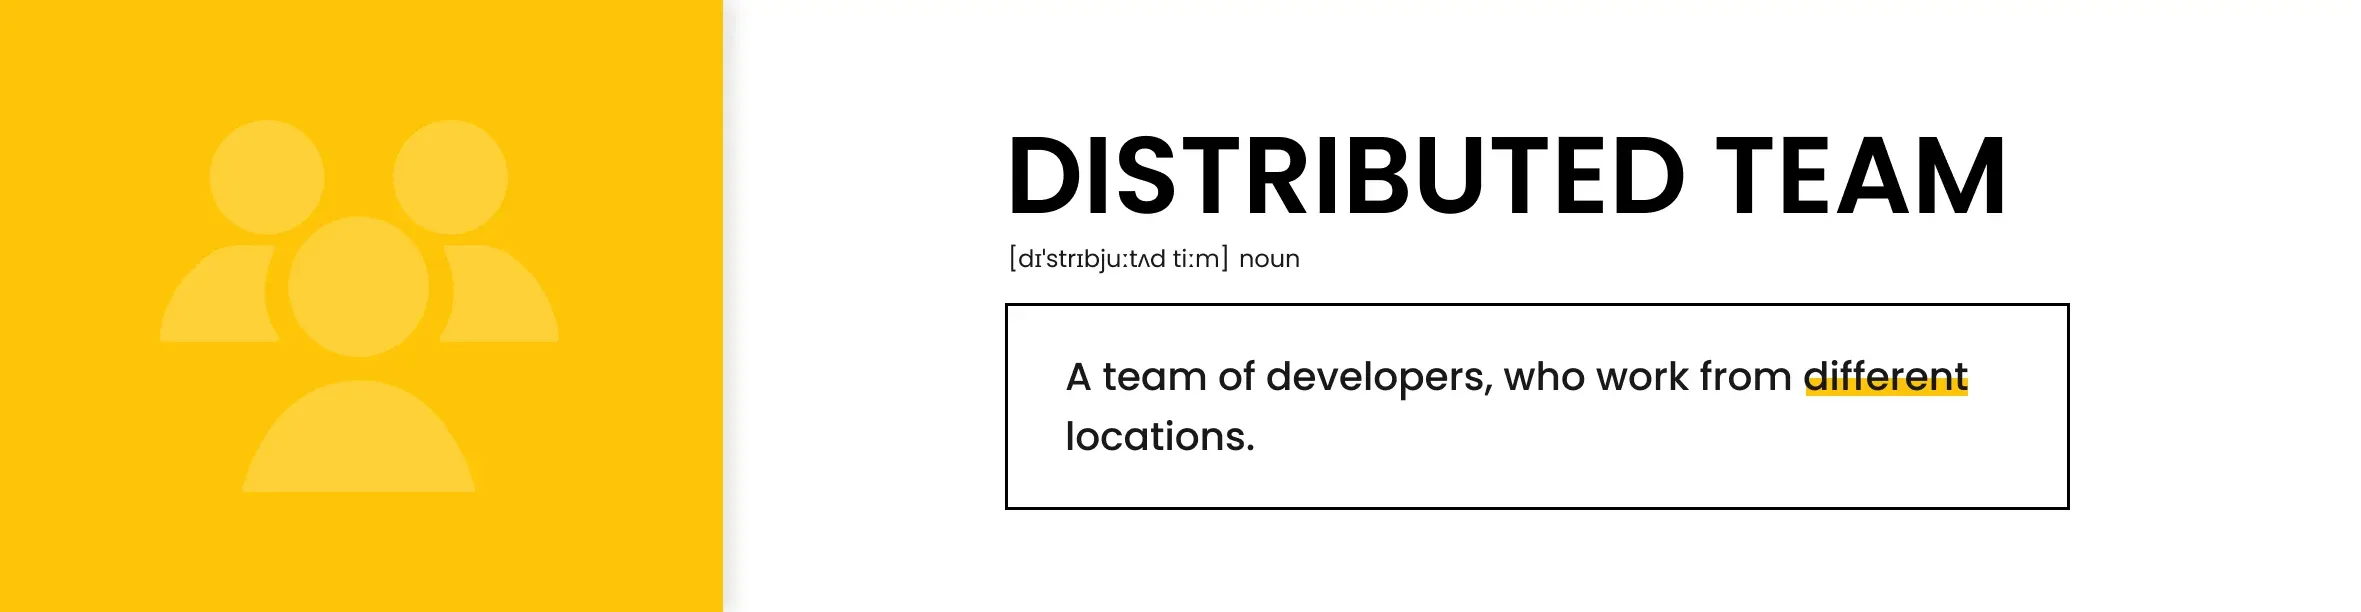 distributed team explained